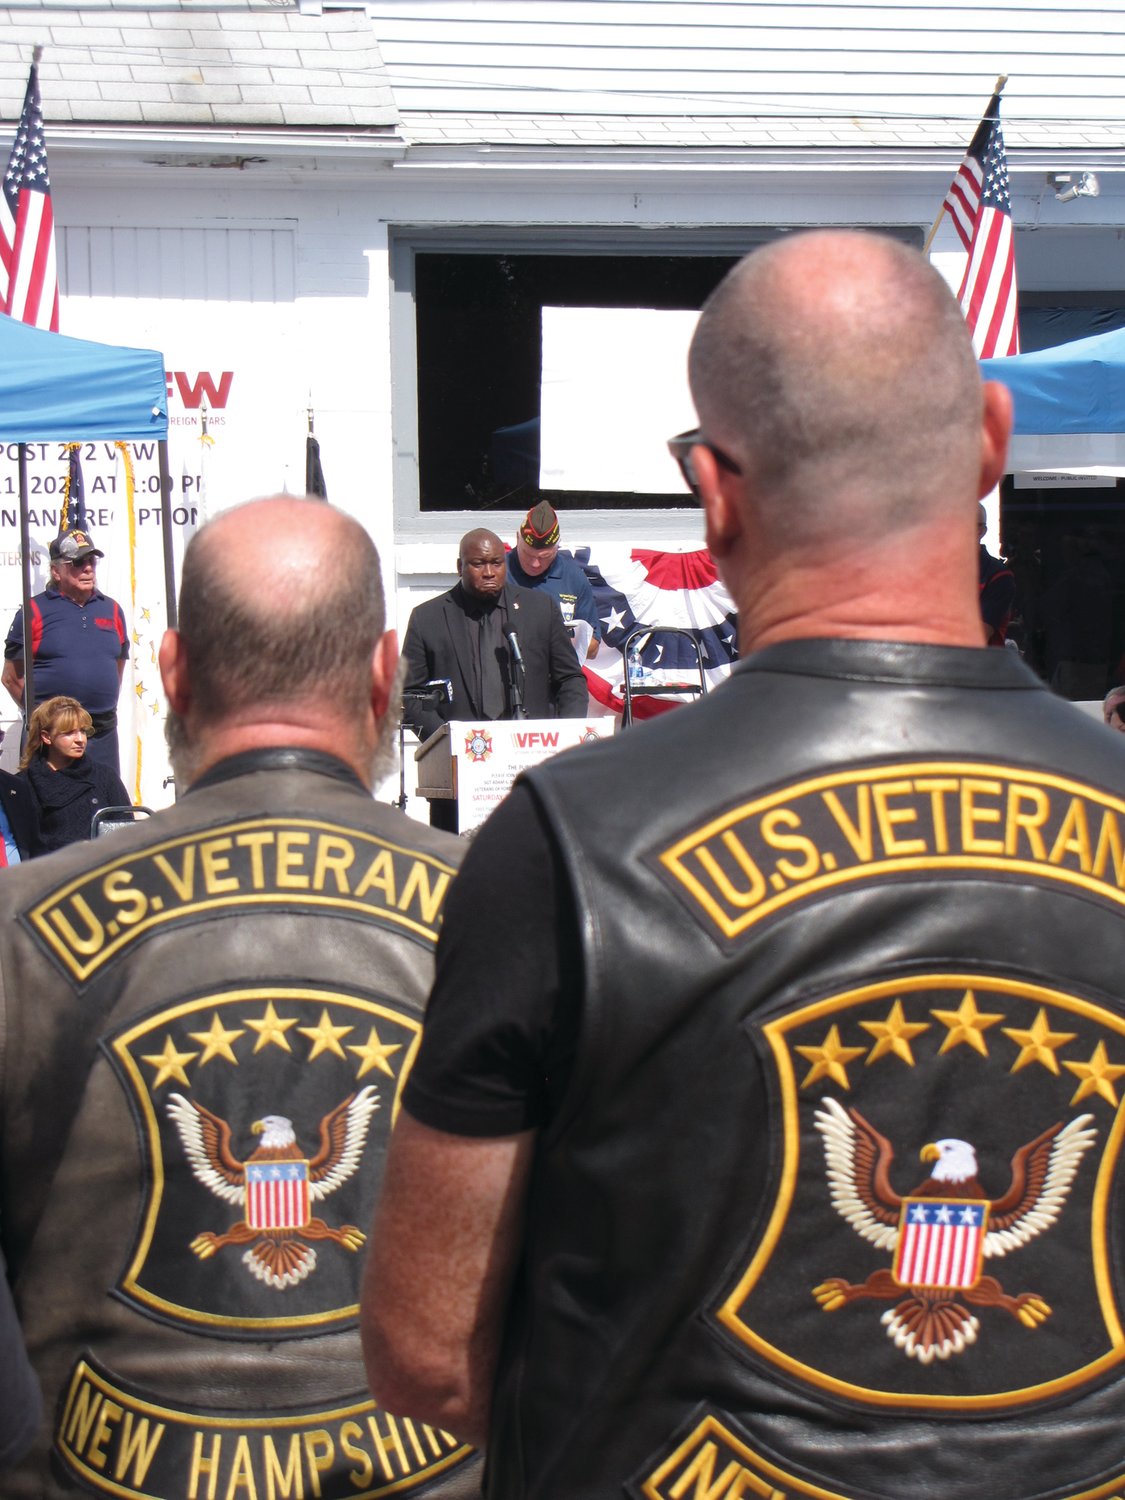 EMOTIONAL DAY: Kasim Yarn, Rhode Island’s veterans affairs director, became emotional during his remarks at Saturday’s ceremony. Looking on are members of the United States Veterans Motorcycle Club, which had chapters from several states represented.